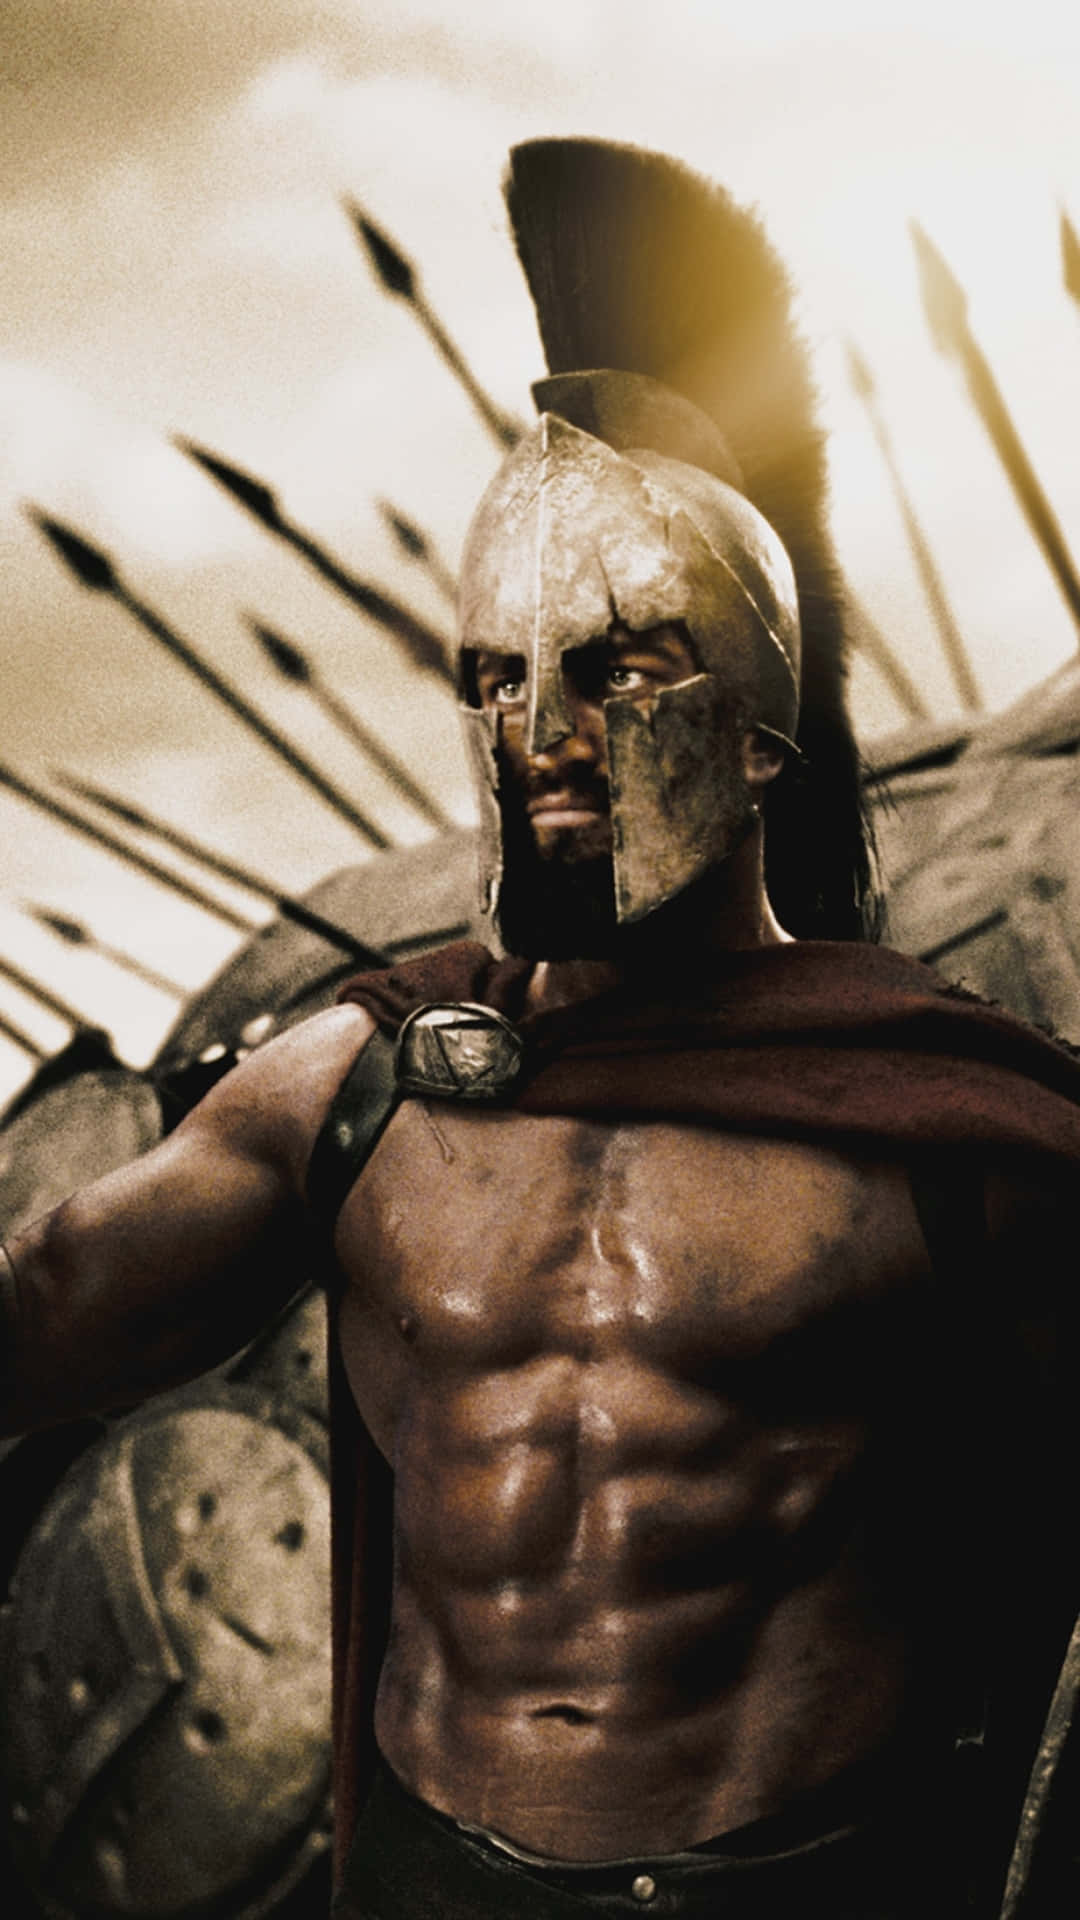 A Muscled Warrior From The 300 Movie Wallpaper